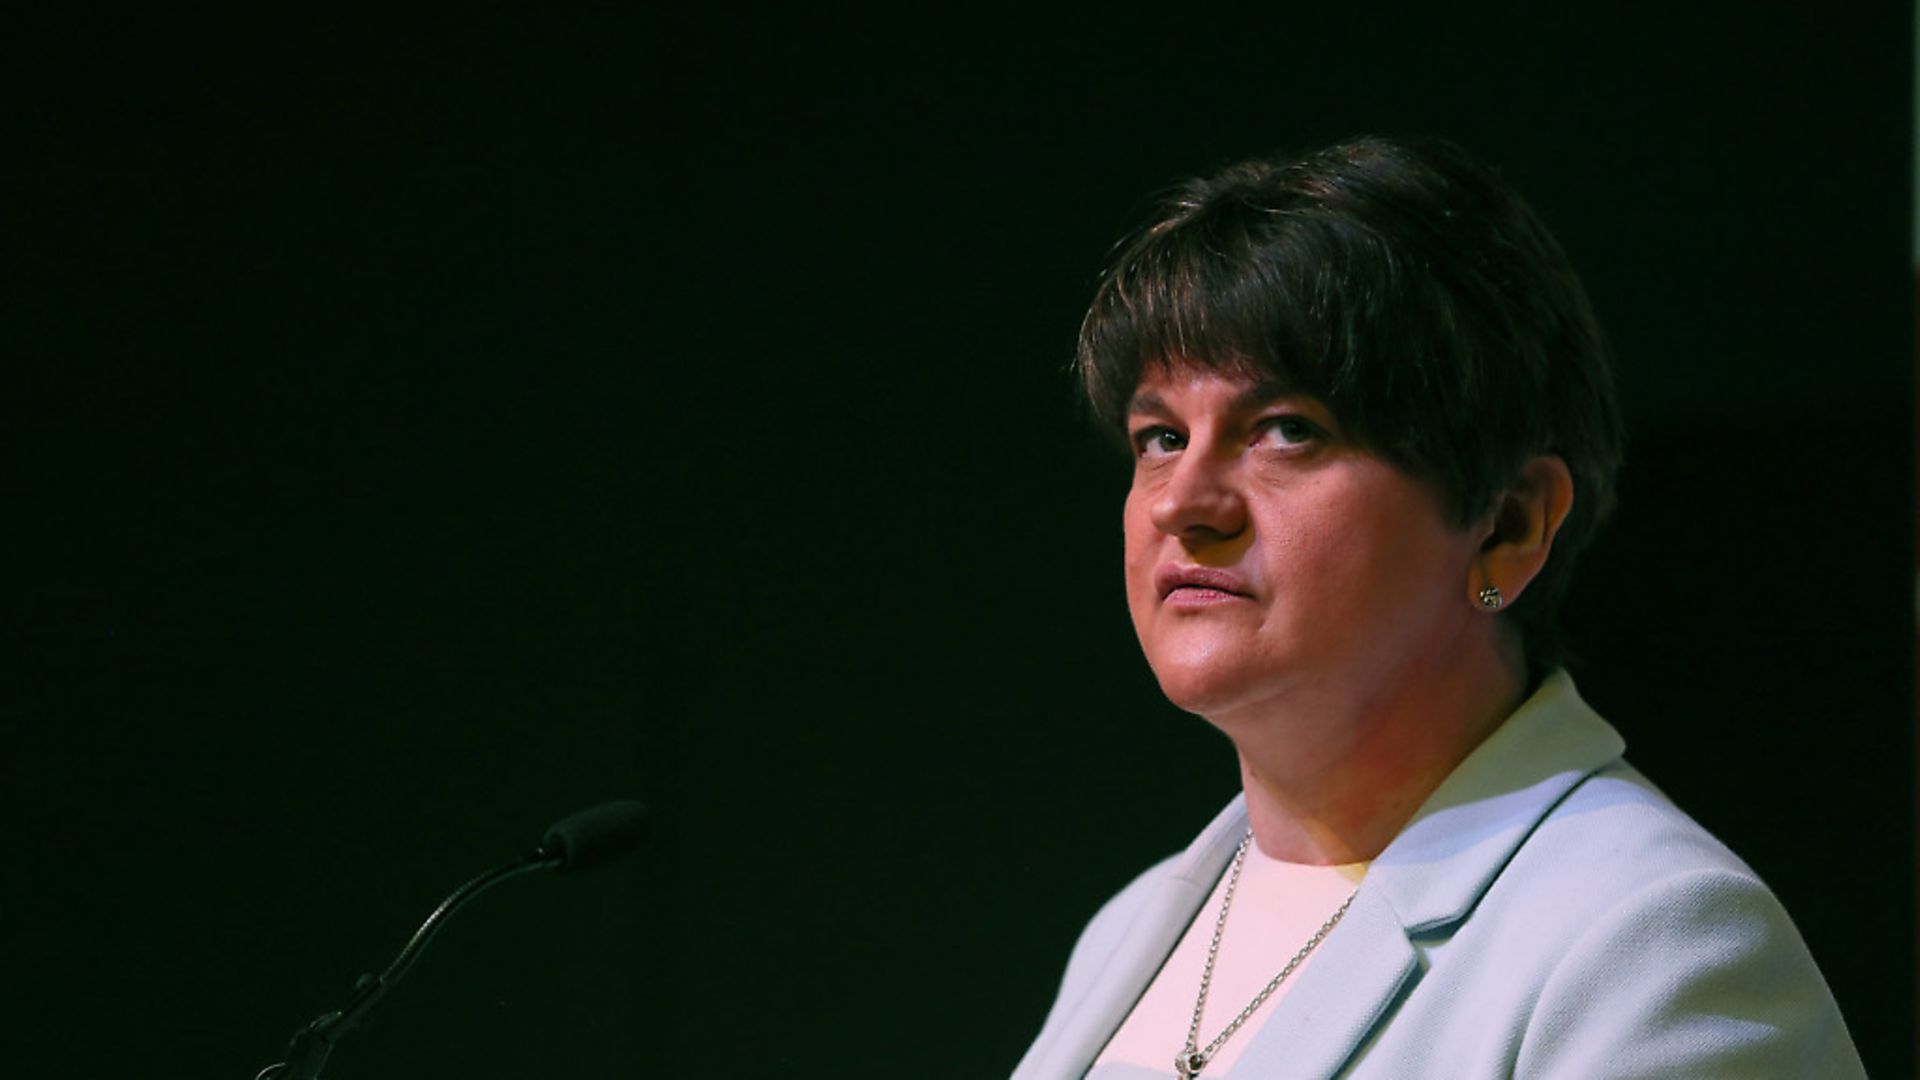 DUP leader Arlene Foster has accused the prime minister of breaking his word on the Northern Irish border. Picture: Brian Lawless/PA Wire/PA Images - Credit: PA Wire/PA Images